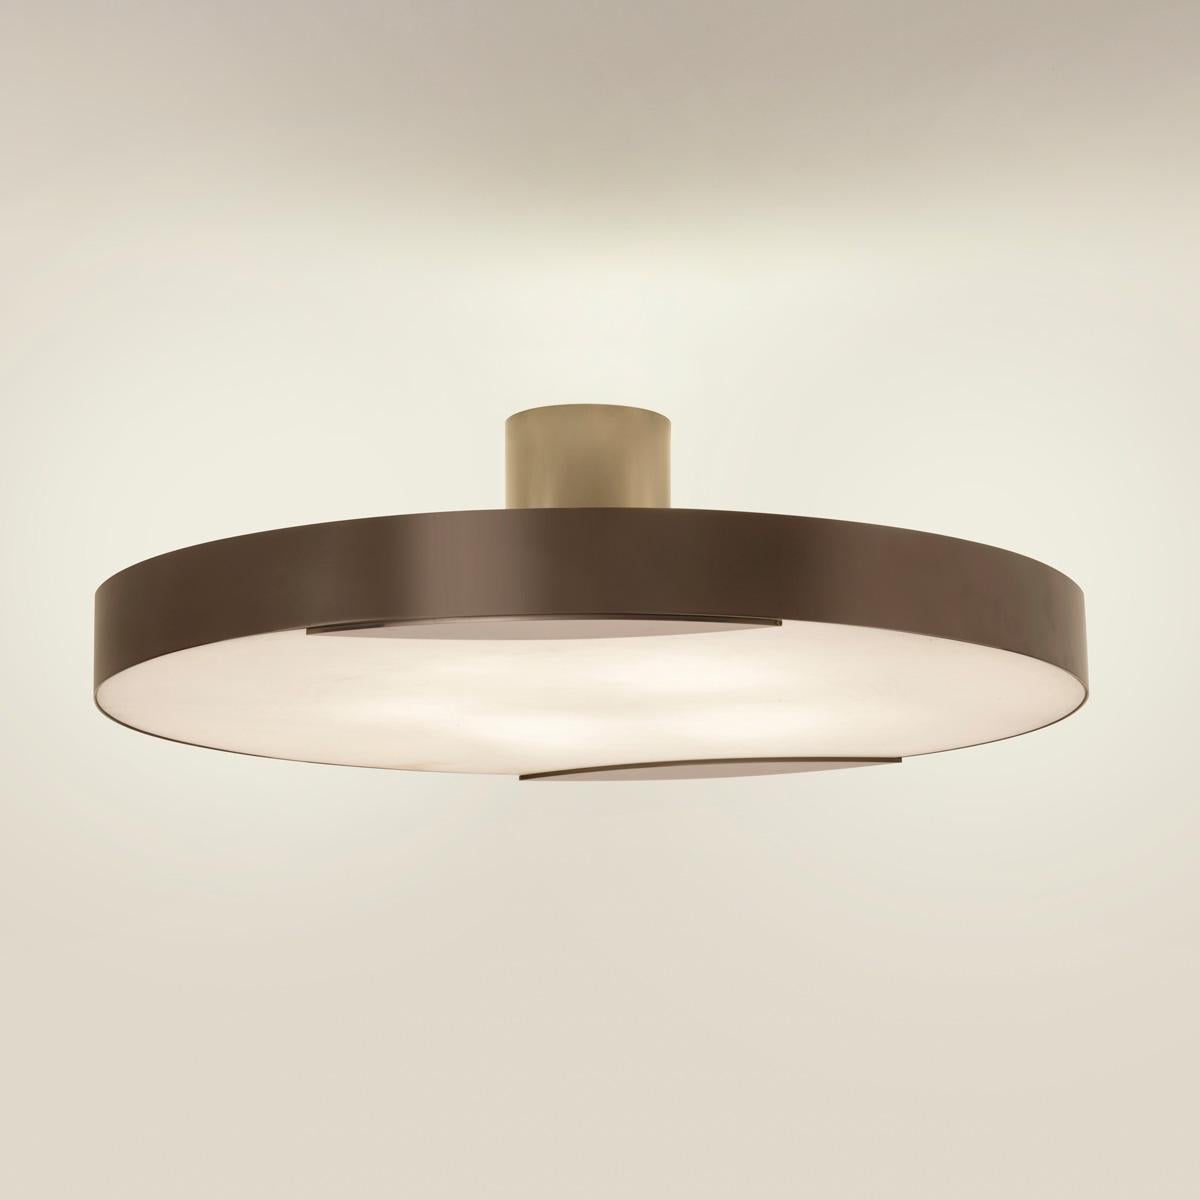 Italian Cloud N.1 Ceiling Light by Gaspare Asaro-Peltro Finish For Sale